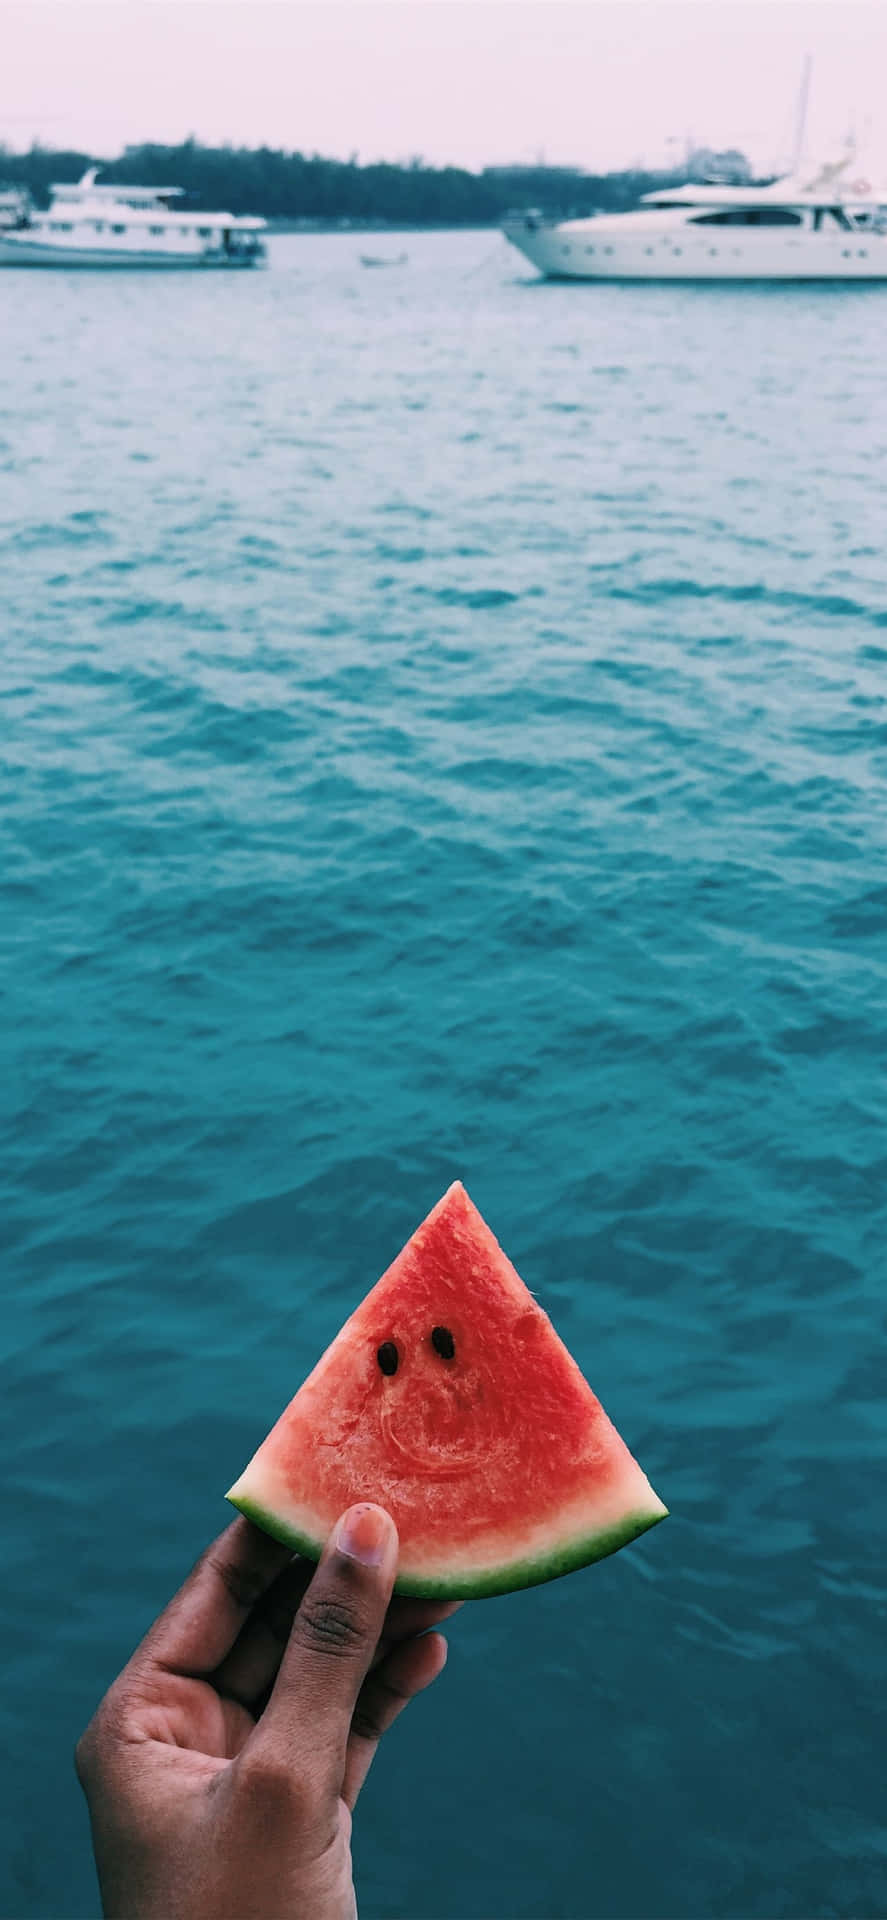 A Person Holding A Slice Of Watermelon In Front Of A Boat Wallpaper